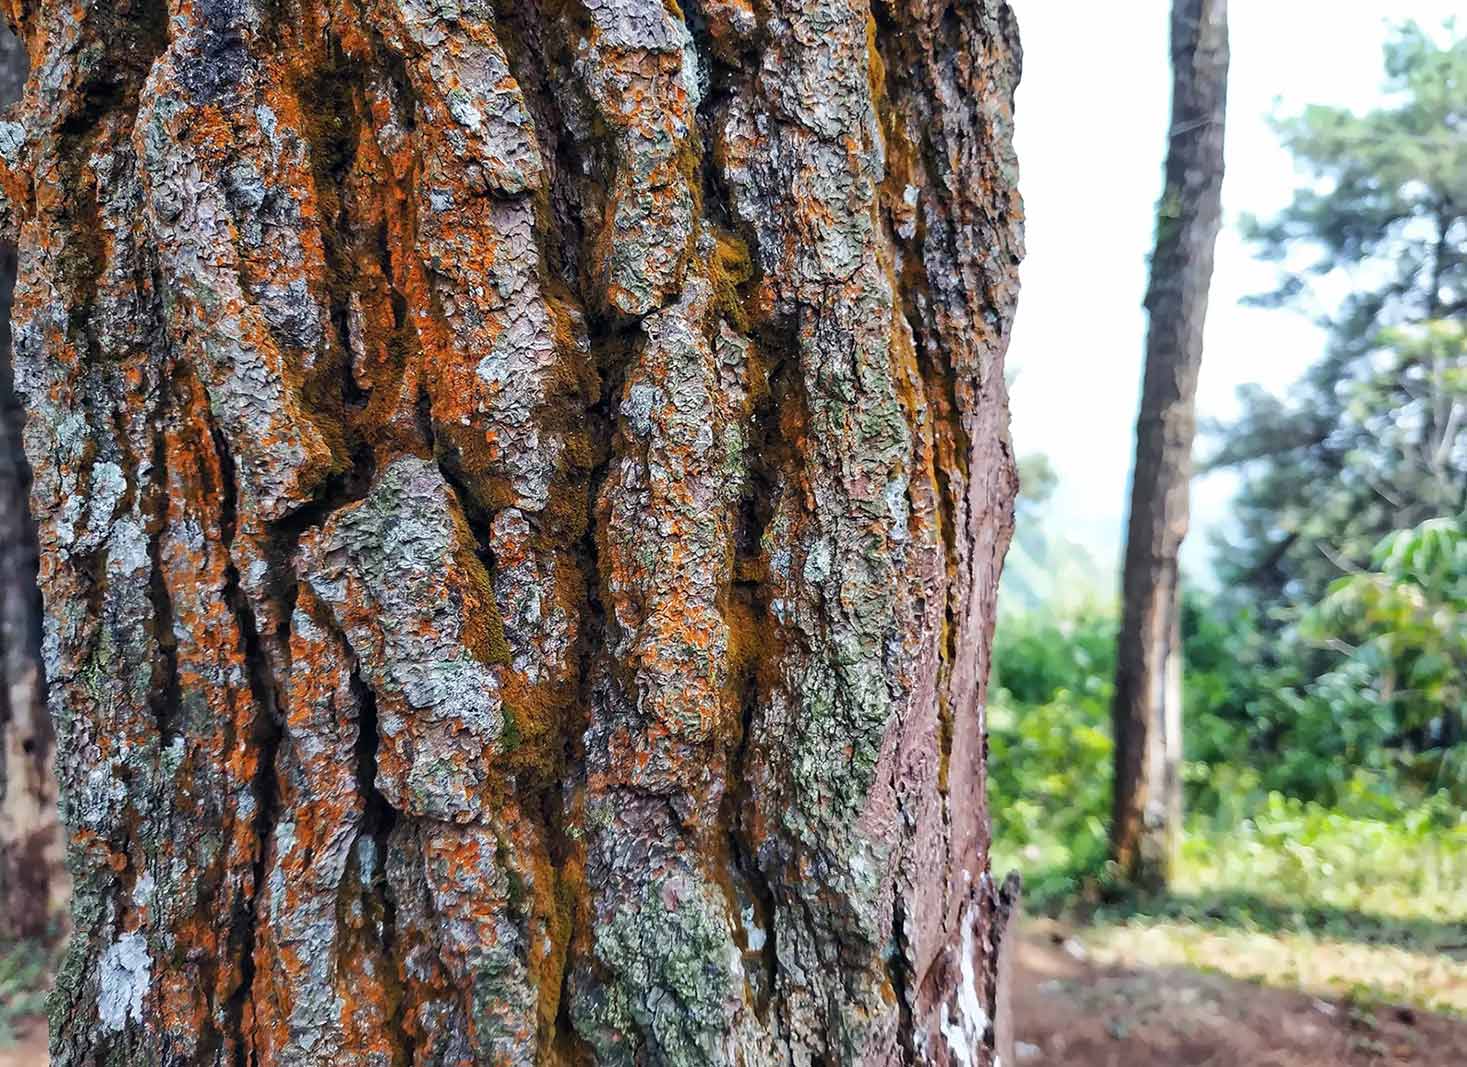 The protective functions of tree bark